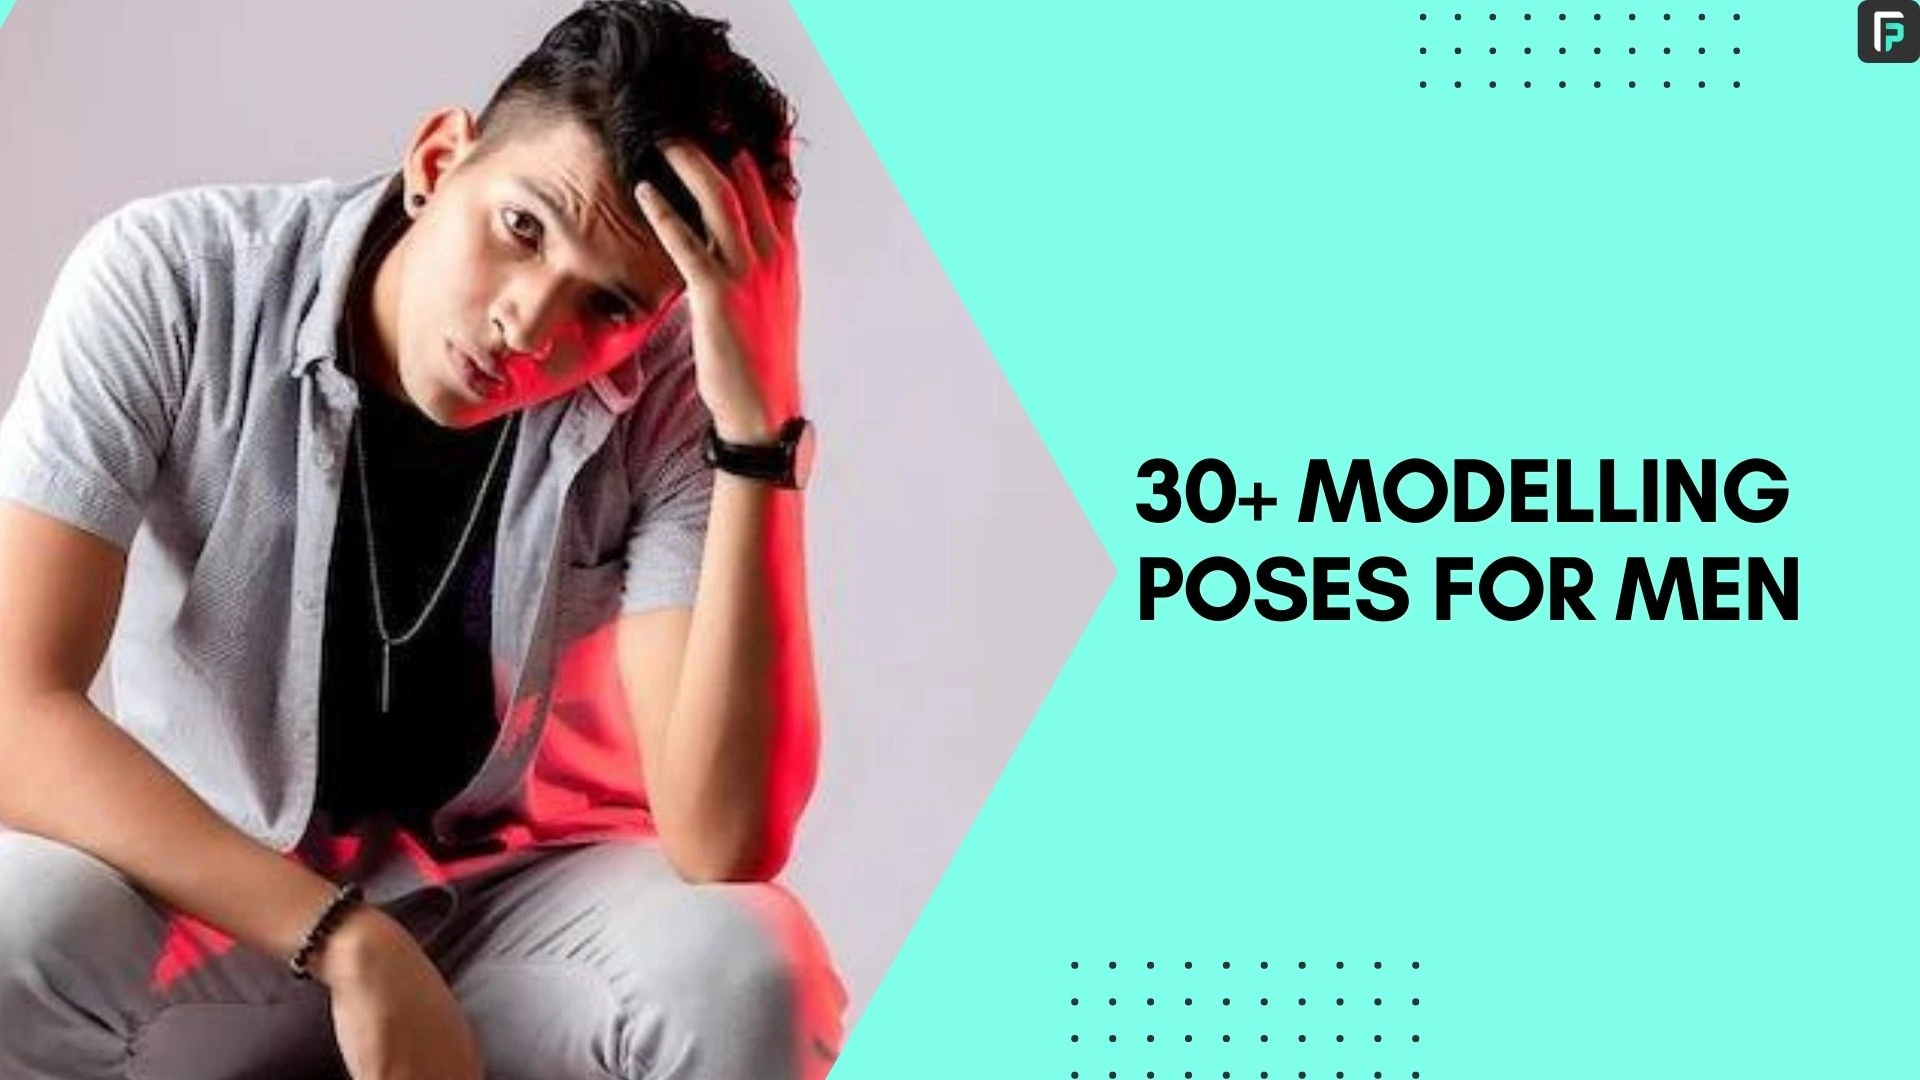 5 Ways To A Great Portrait Poses | Posing Guide - IvanYolo